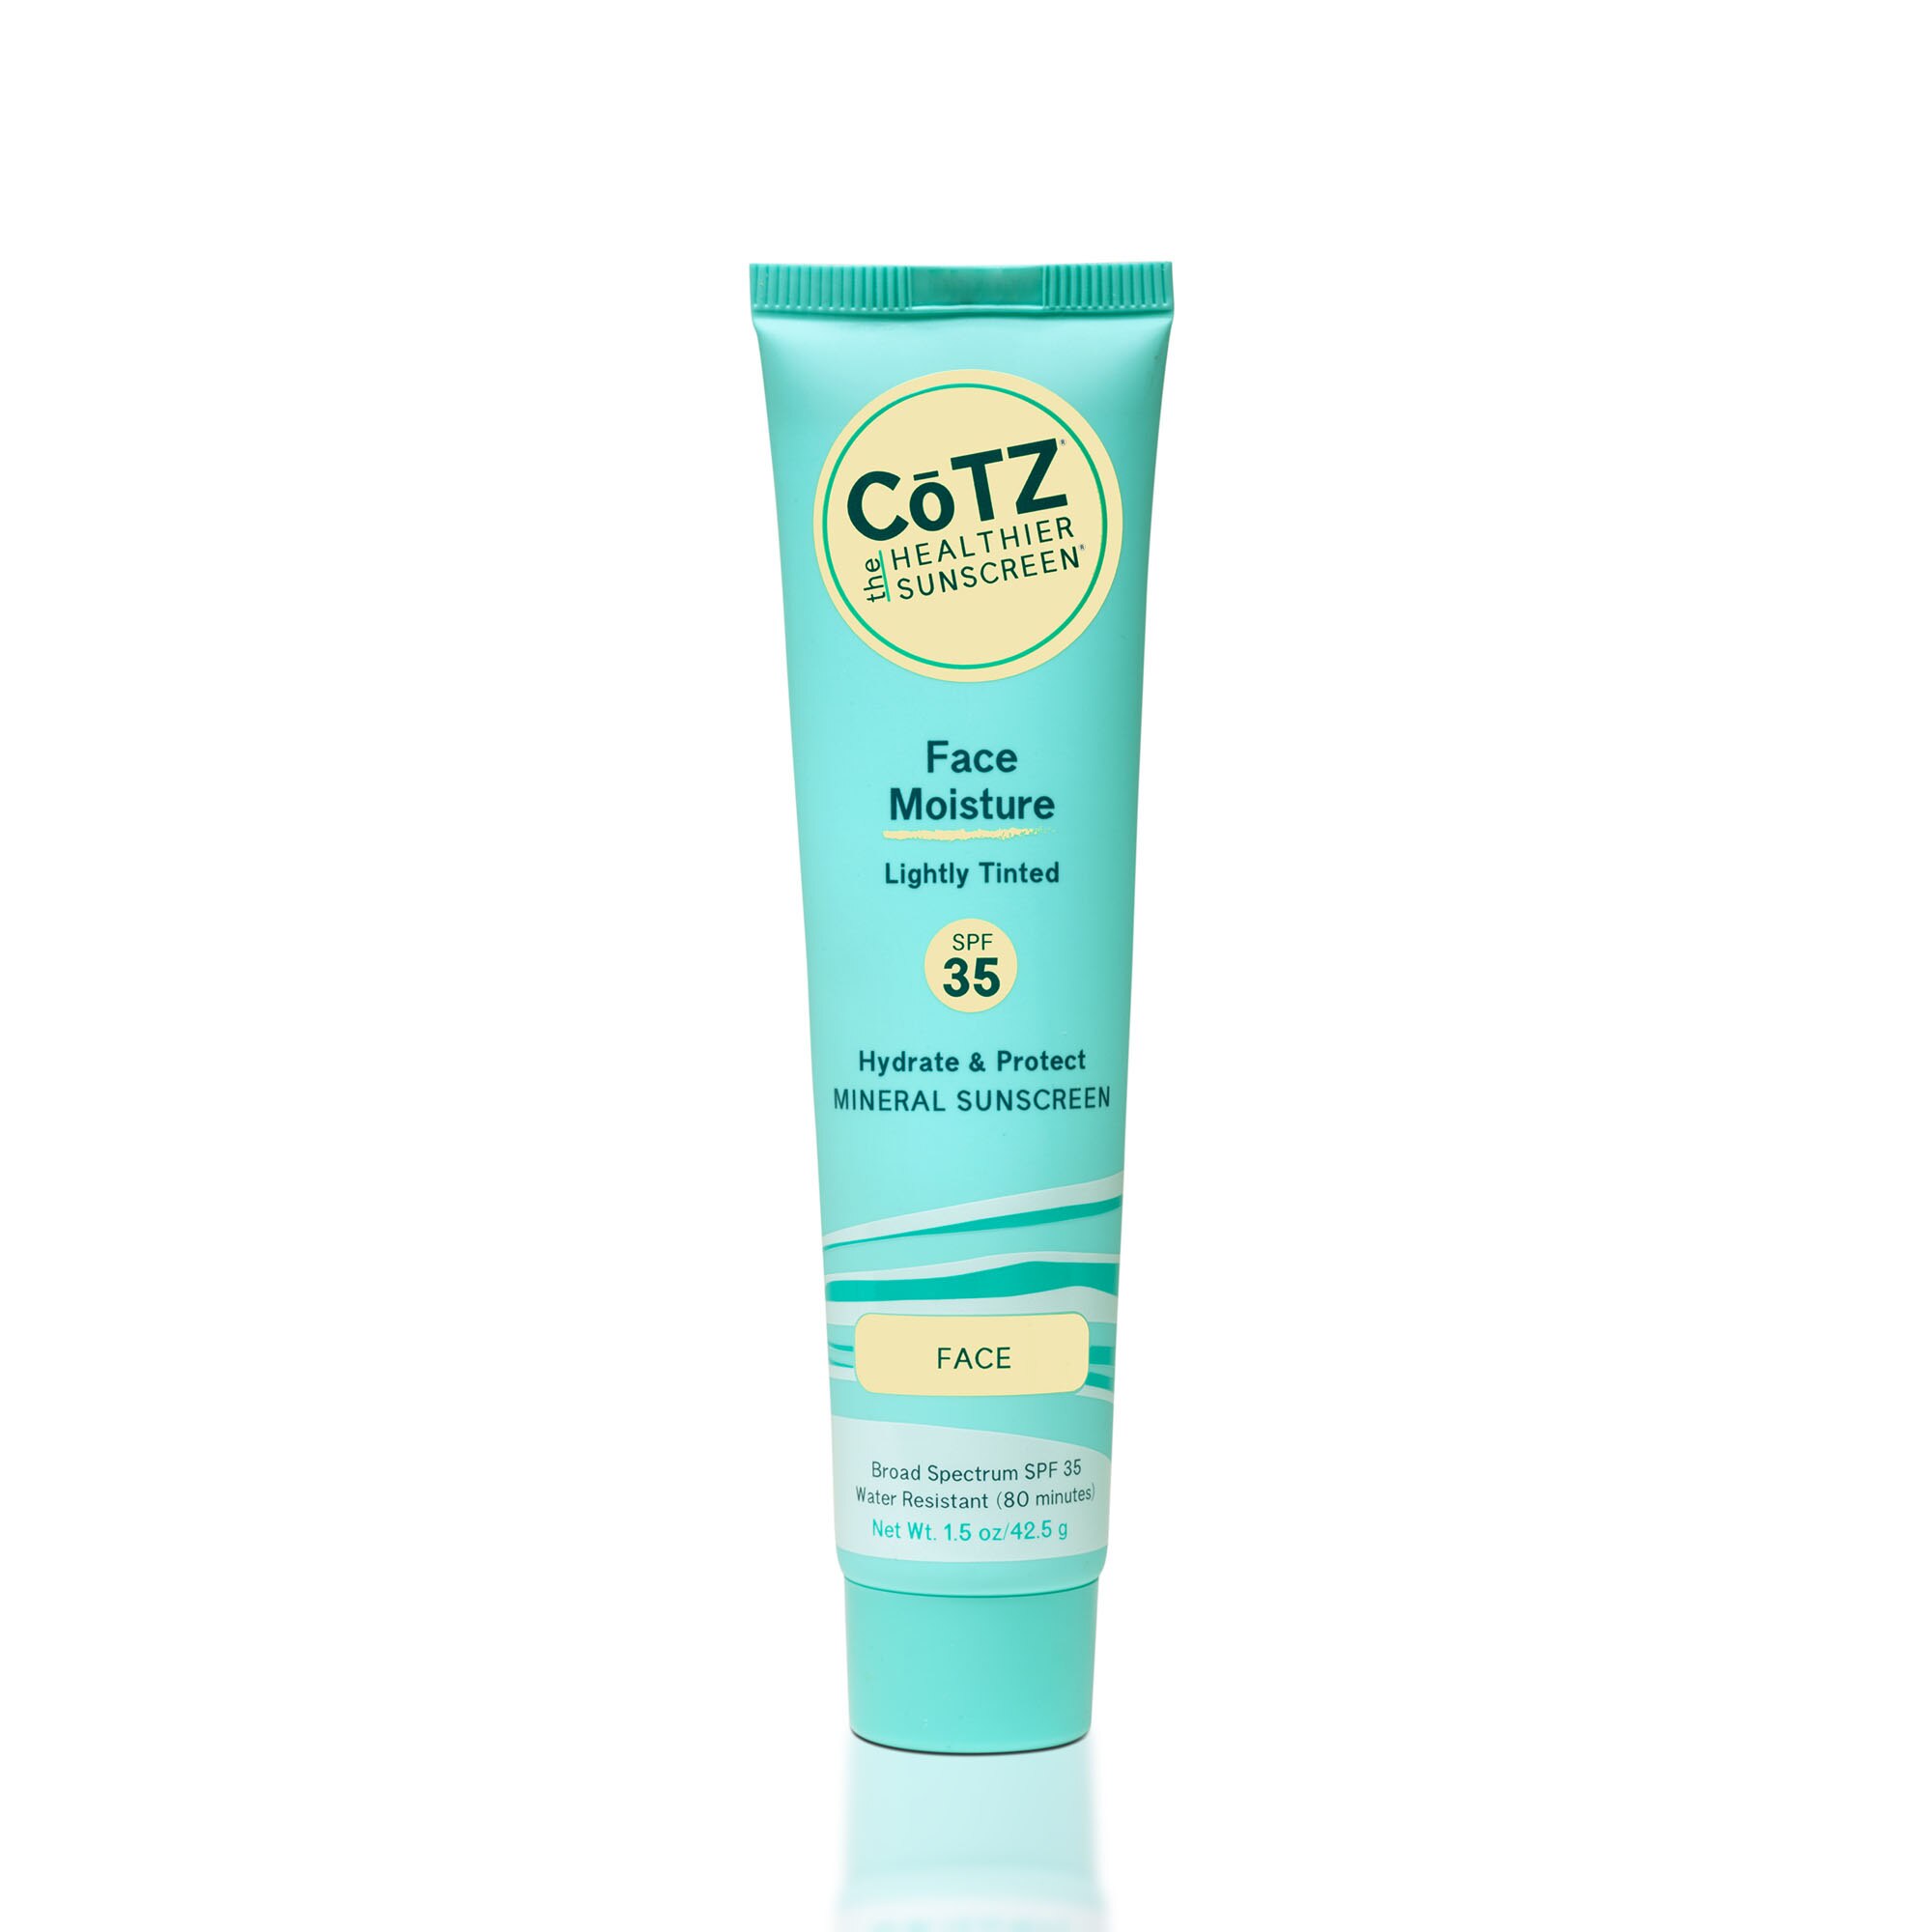 CoTZ Face Moisture Lightly Tinted Mineral Sunscreen for Face, SPF 35, 1.5 oz